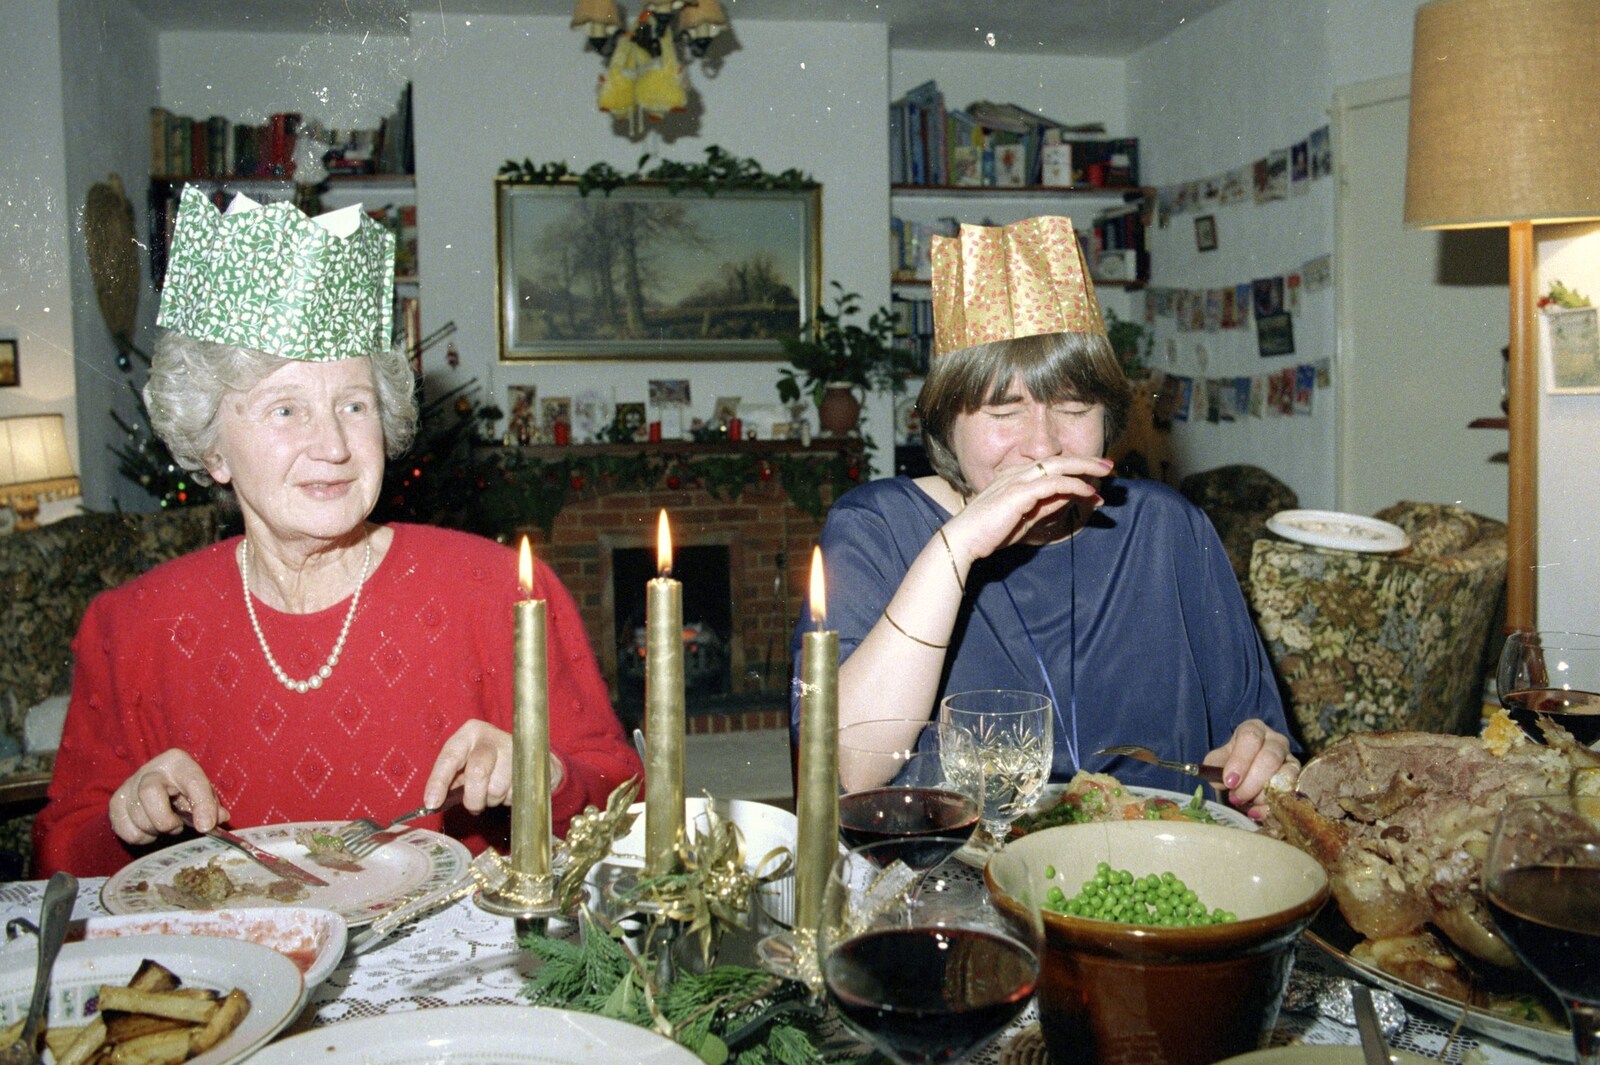 Grandmother and Caroline from Christmas Down South, Burton and Walkford, Dorset - 25th December 1994